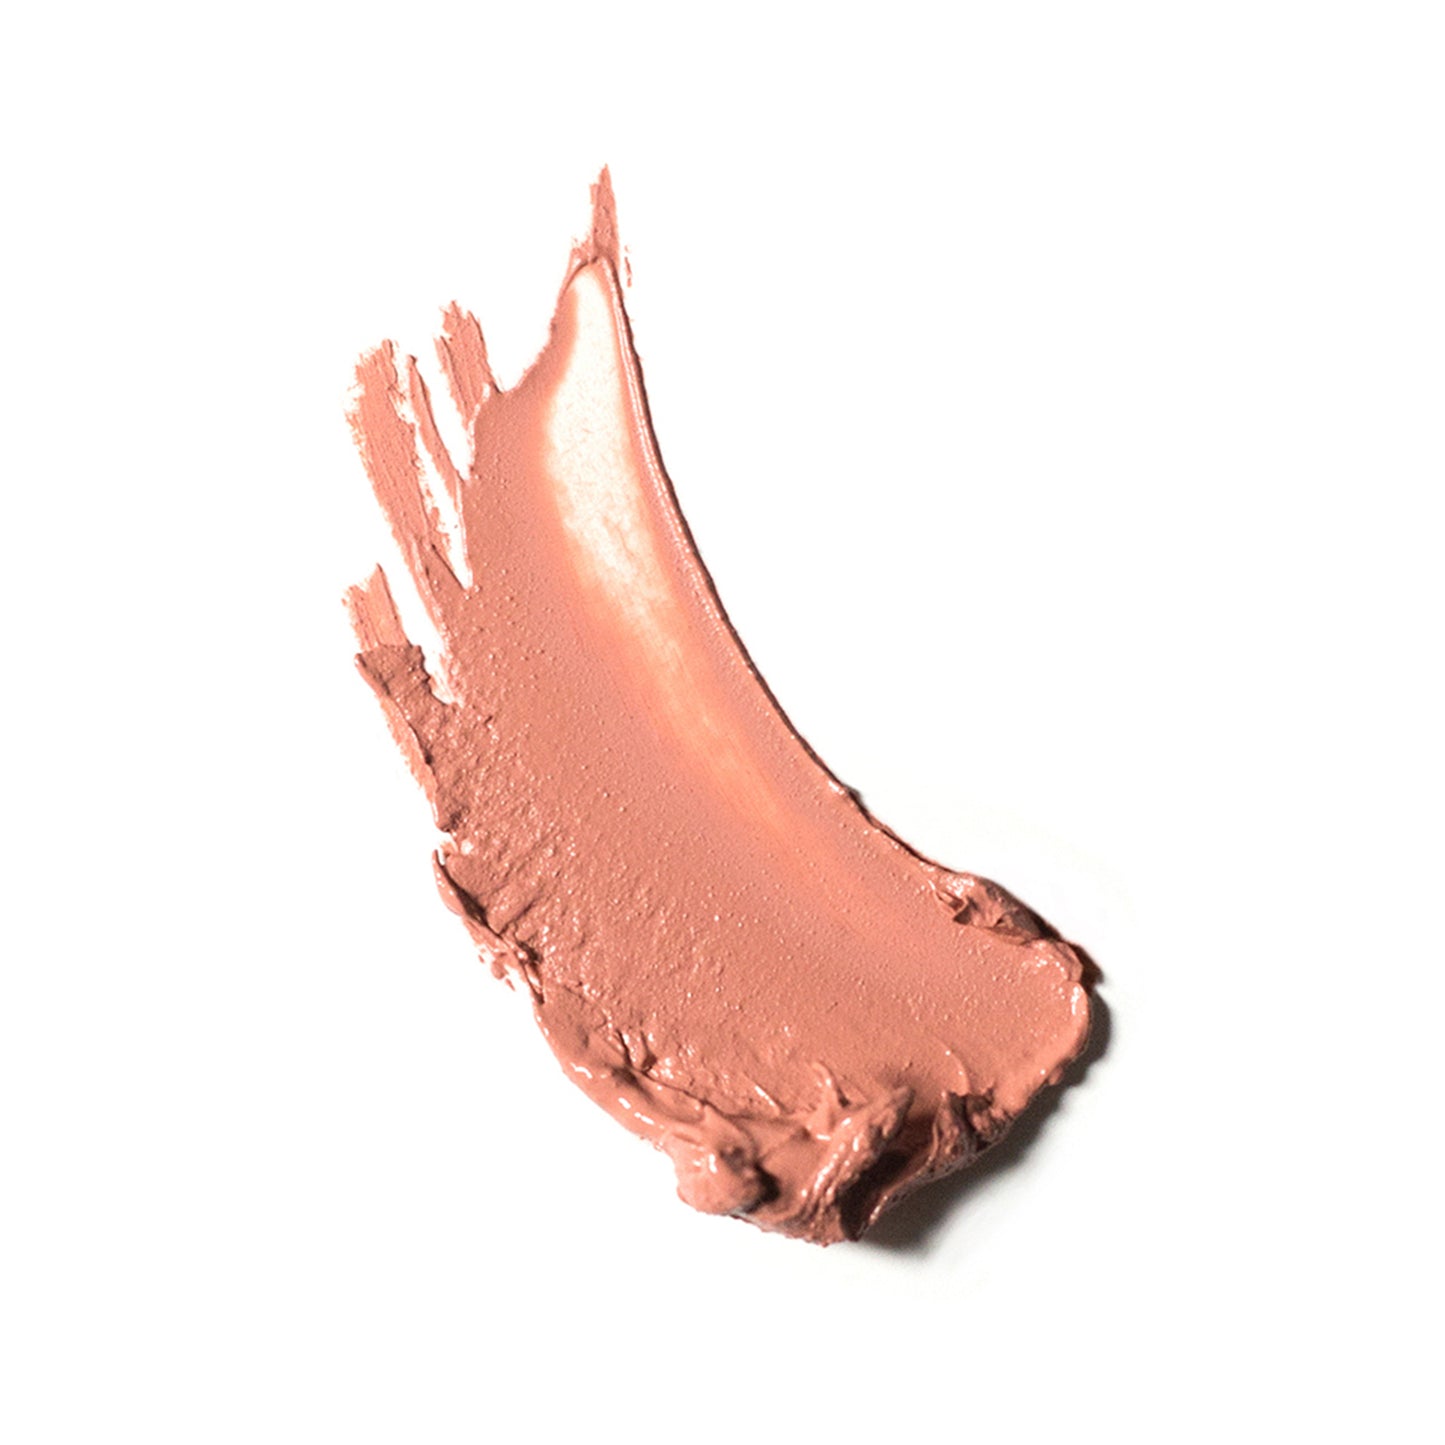 A swatch of the Ere Perez Carrot Colour Pot cream blush in Harmony, a neutral peach shade. 